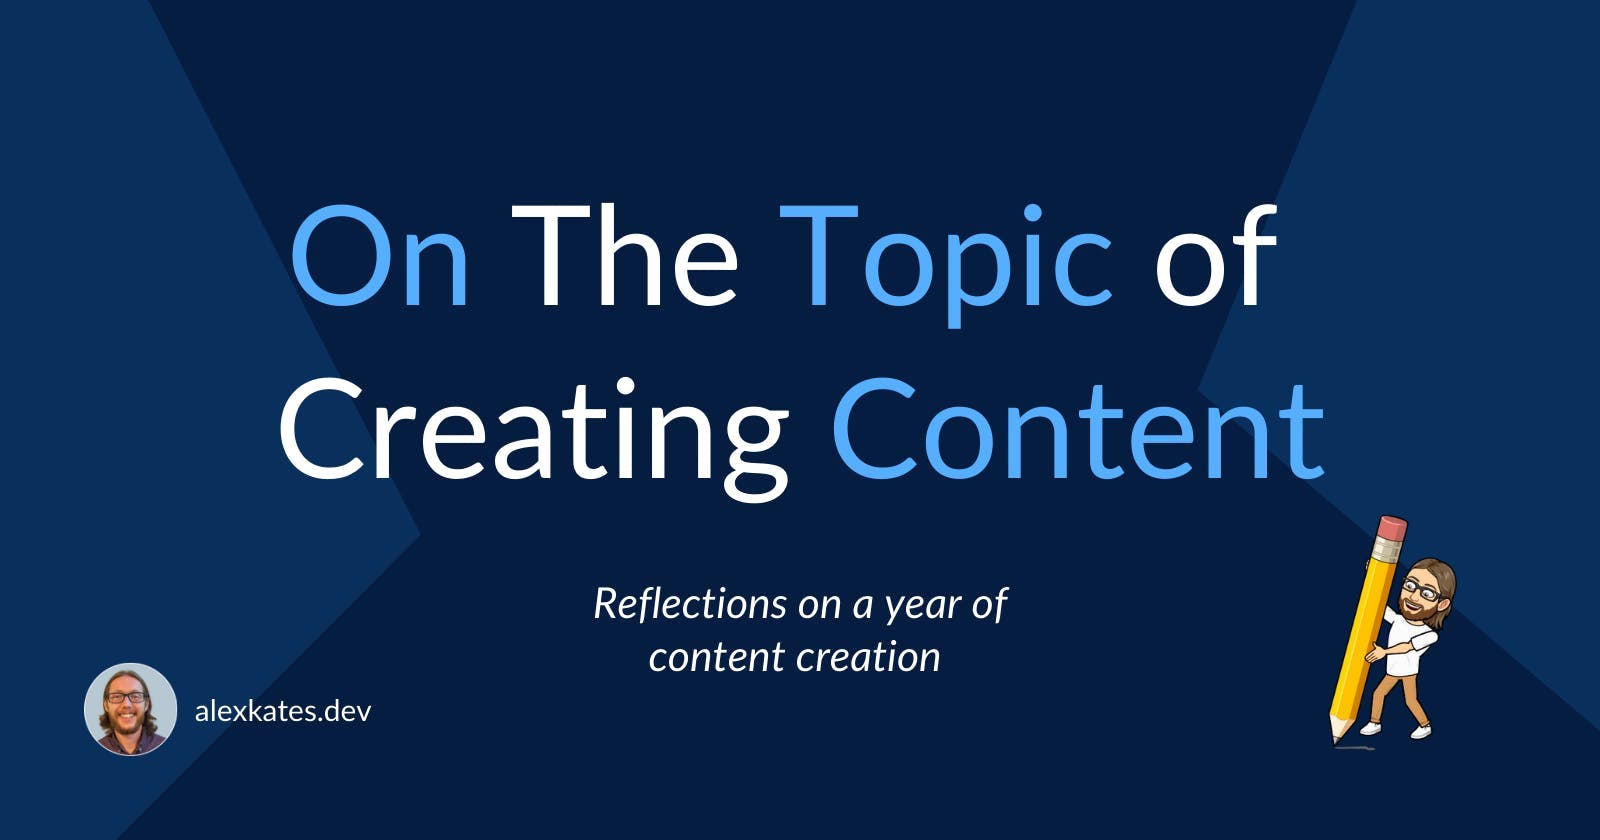 On The Topic of Creating Content